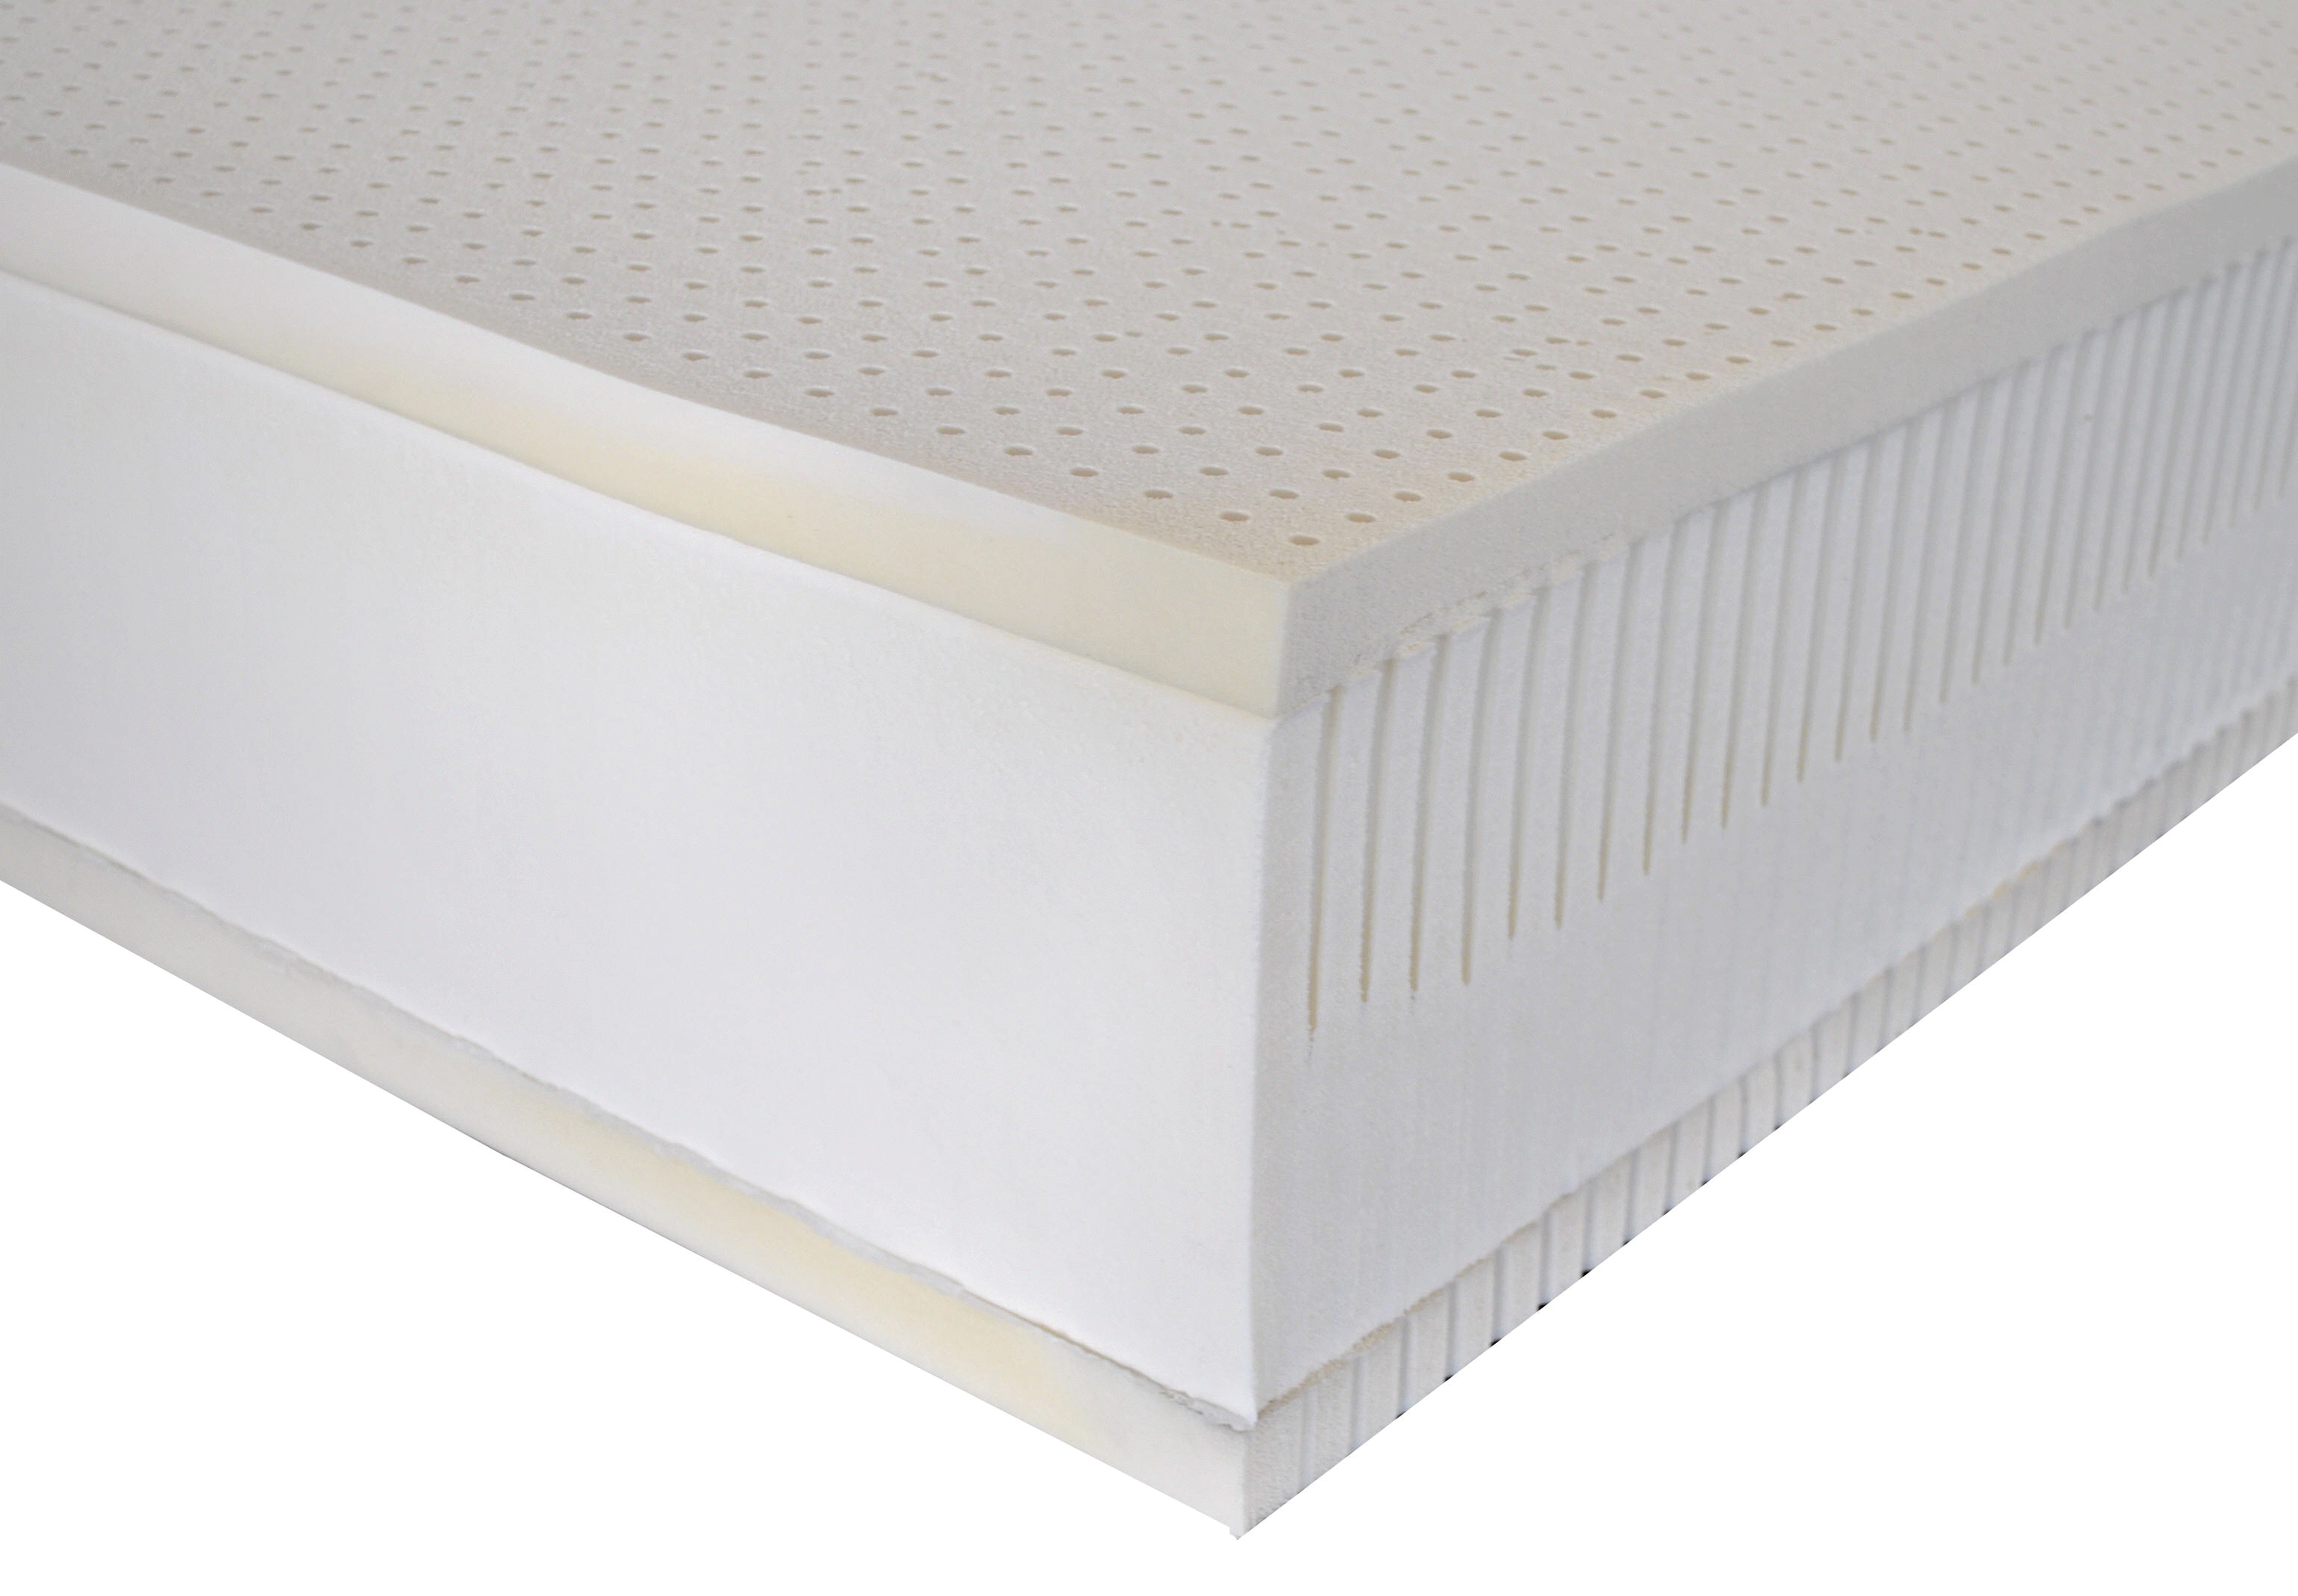 high profile 9" latex mattress rated quality reviews yelp